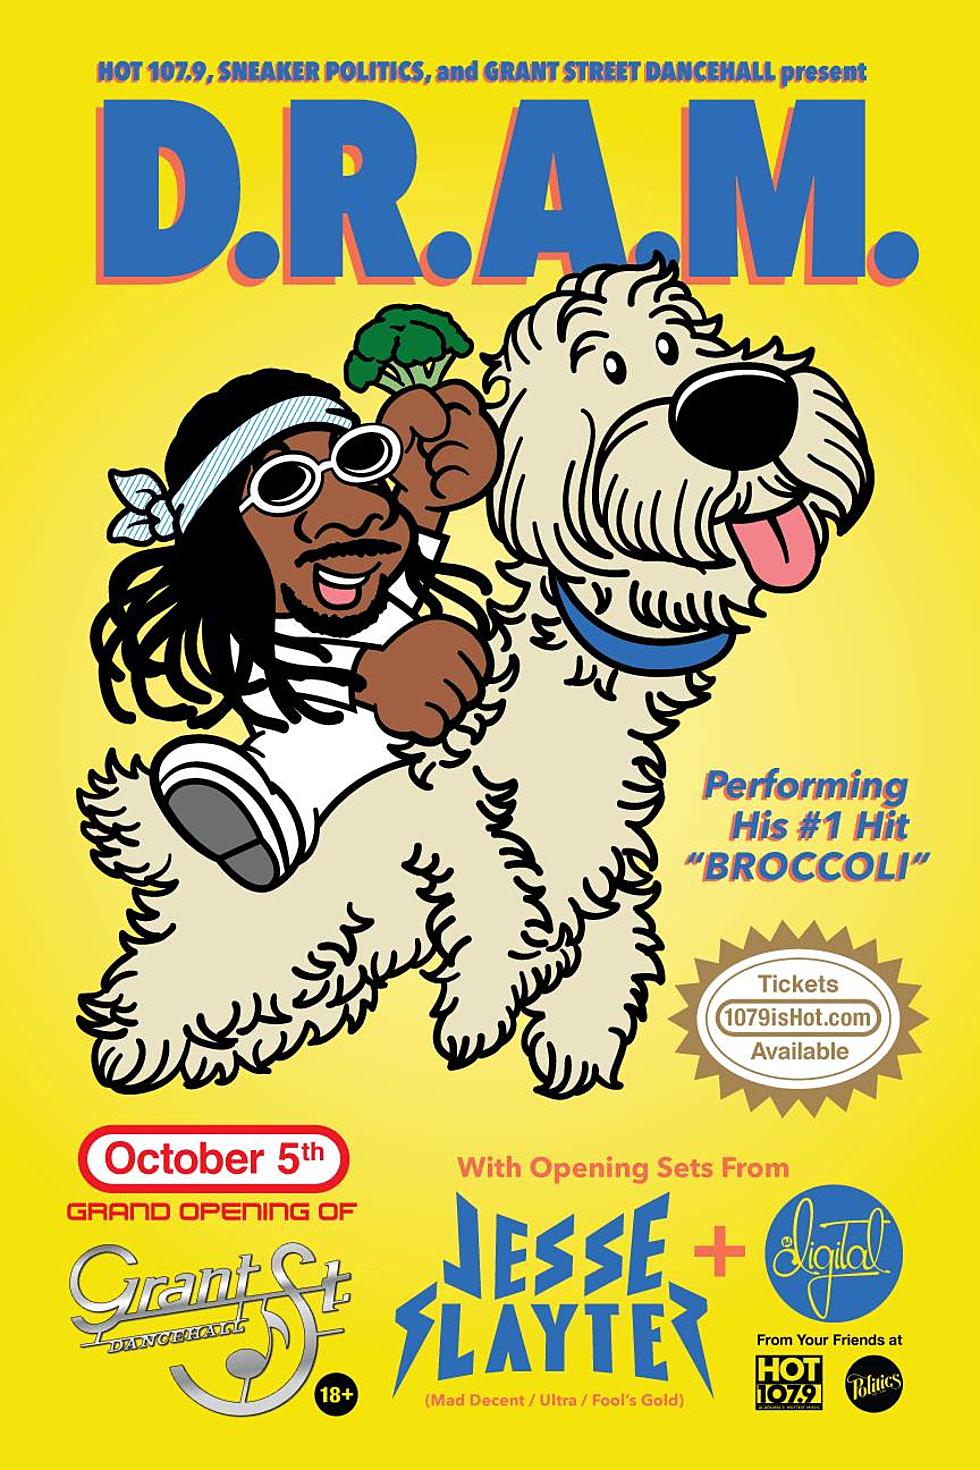 Hot 107.9 Is Kicking Off Fall Break With D.R.A.M. At Grant St. Dancehall